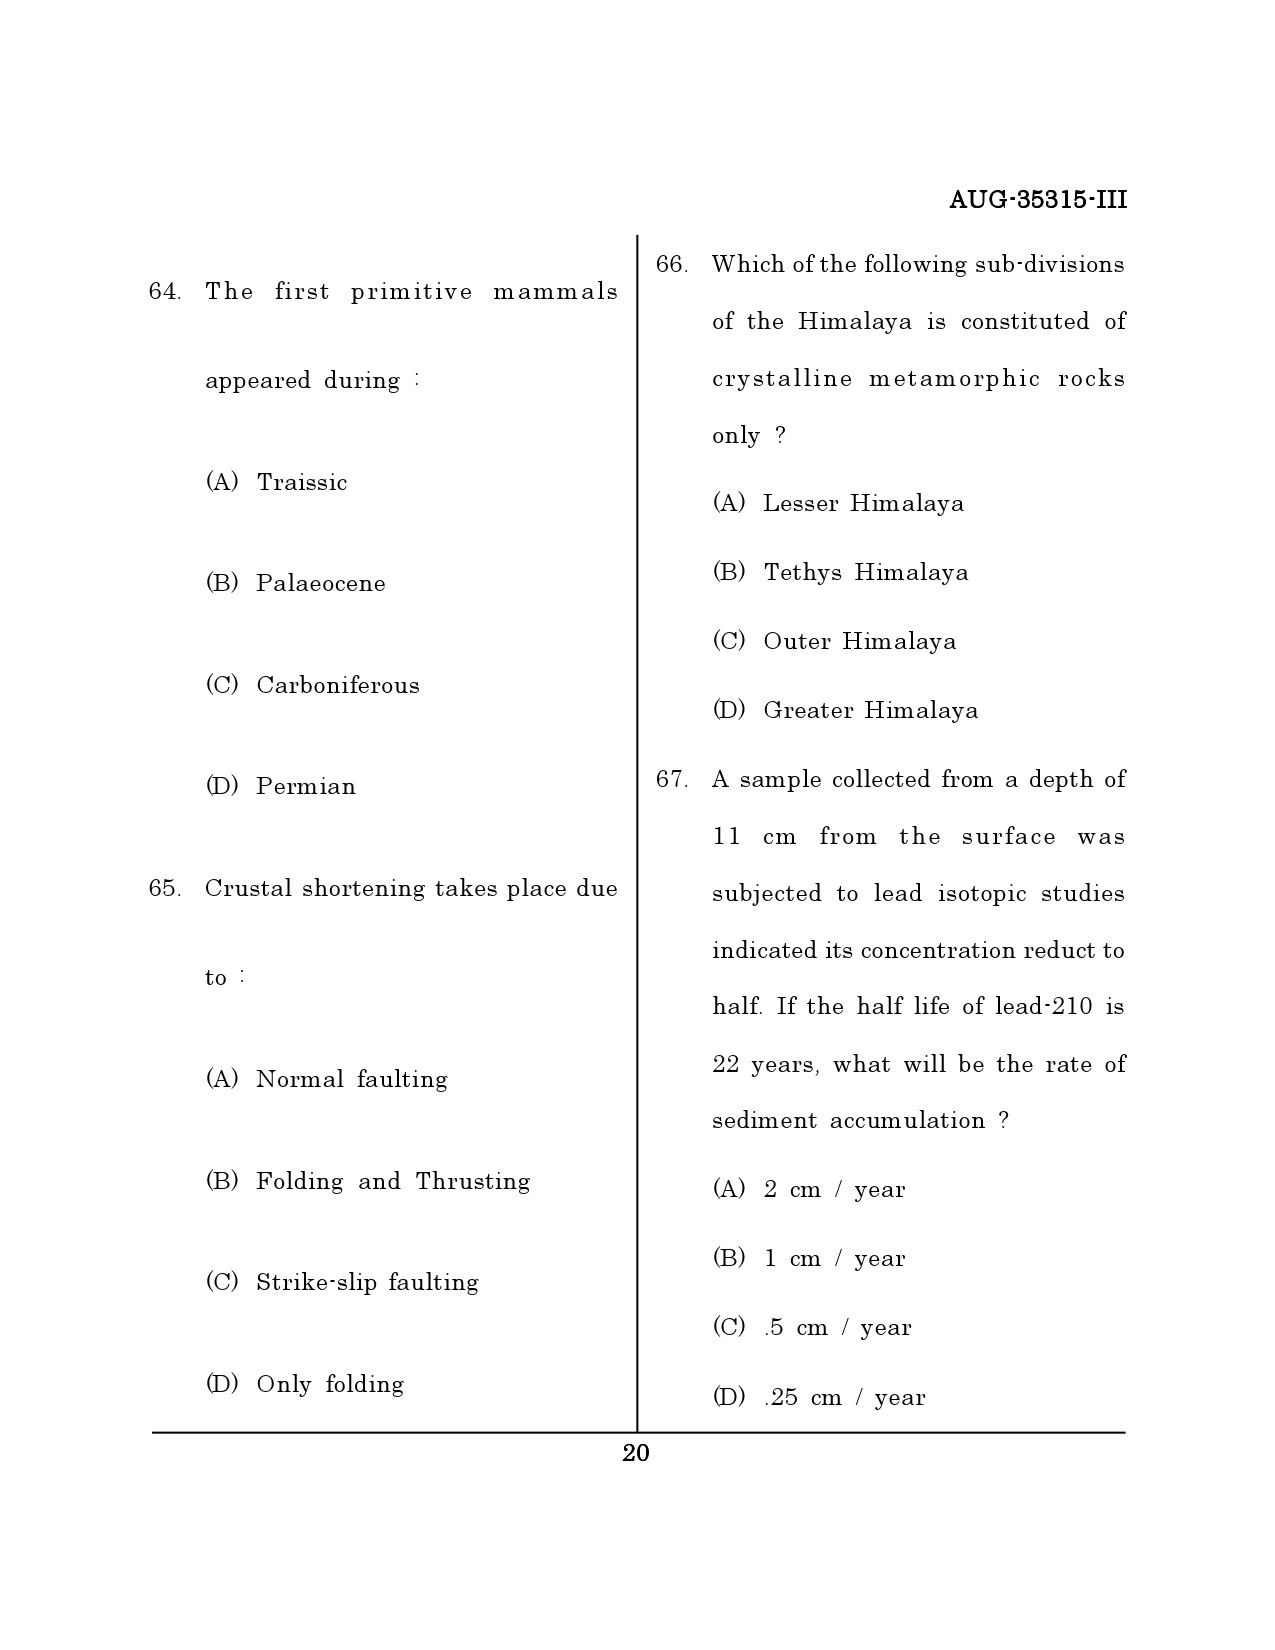 Maharashtra SET Earth Atmospheric Ocean Planetary Science Question Paper III August 2015 19